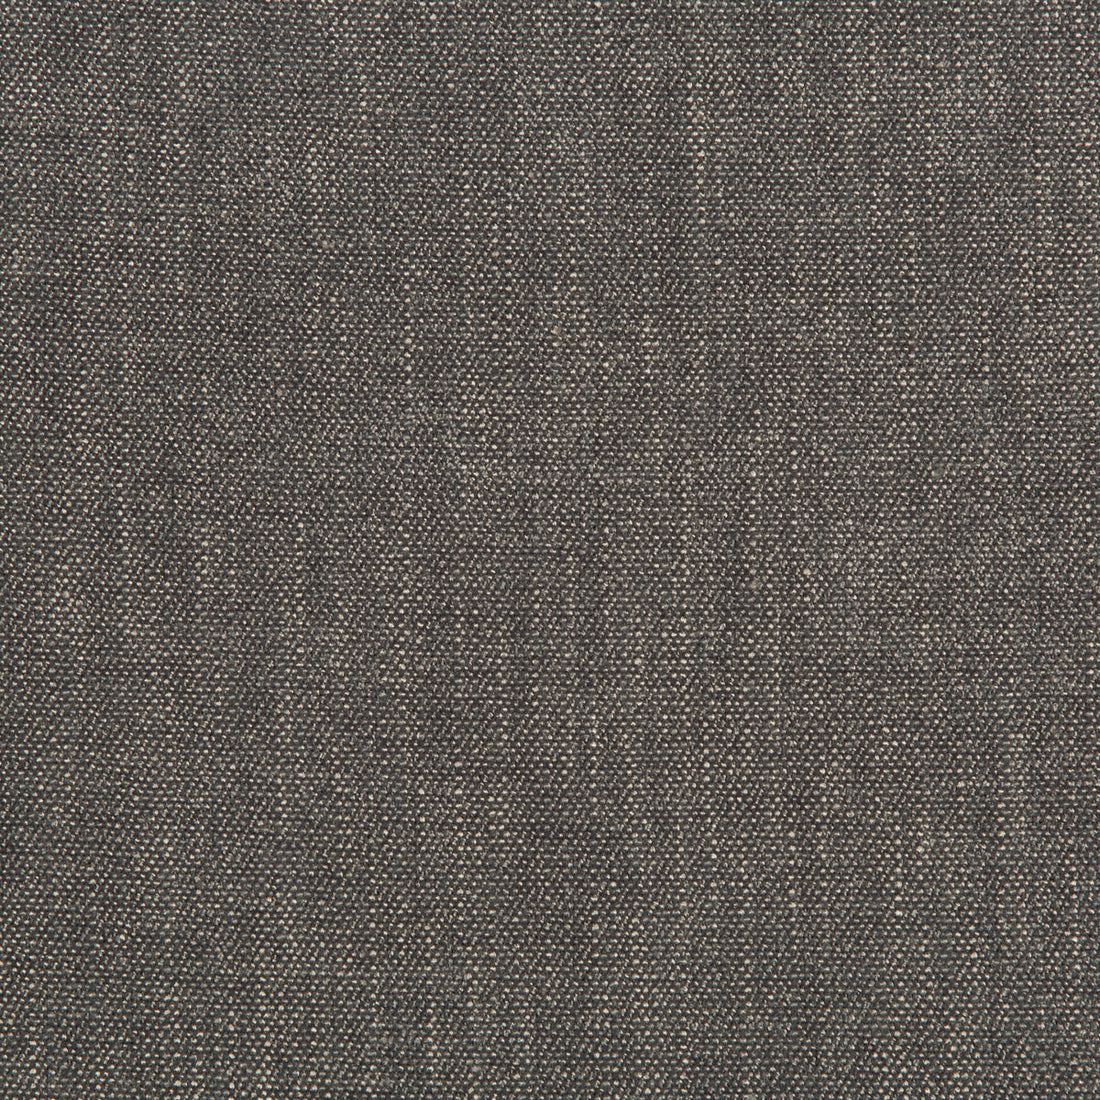 Kravet Couture fabric in 34807-11 color - pattern 34807.11.0 - by Kravet Couture in the Mabley Handler collection